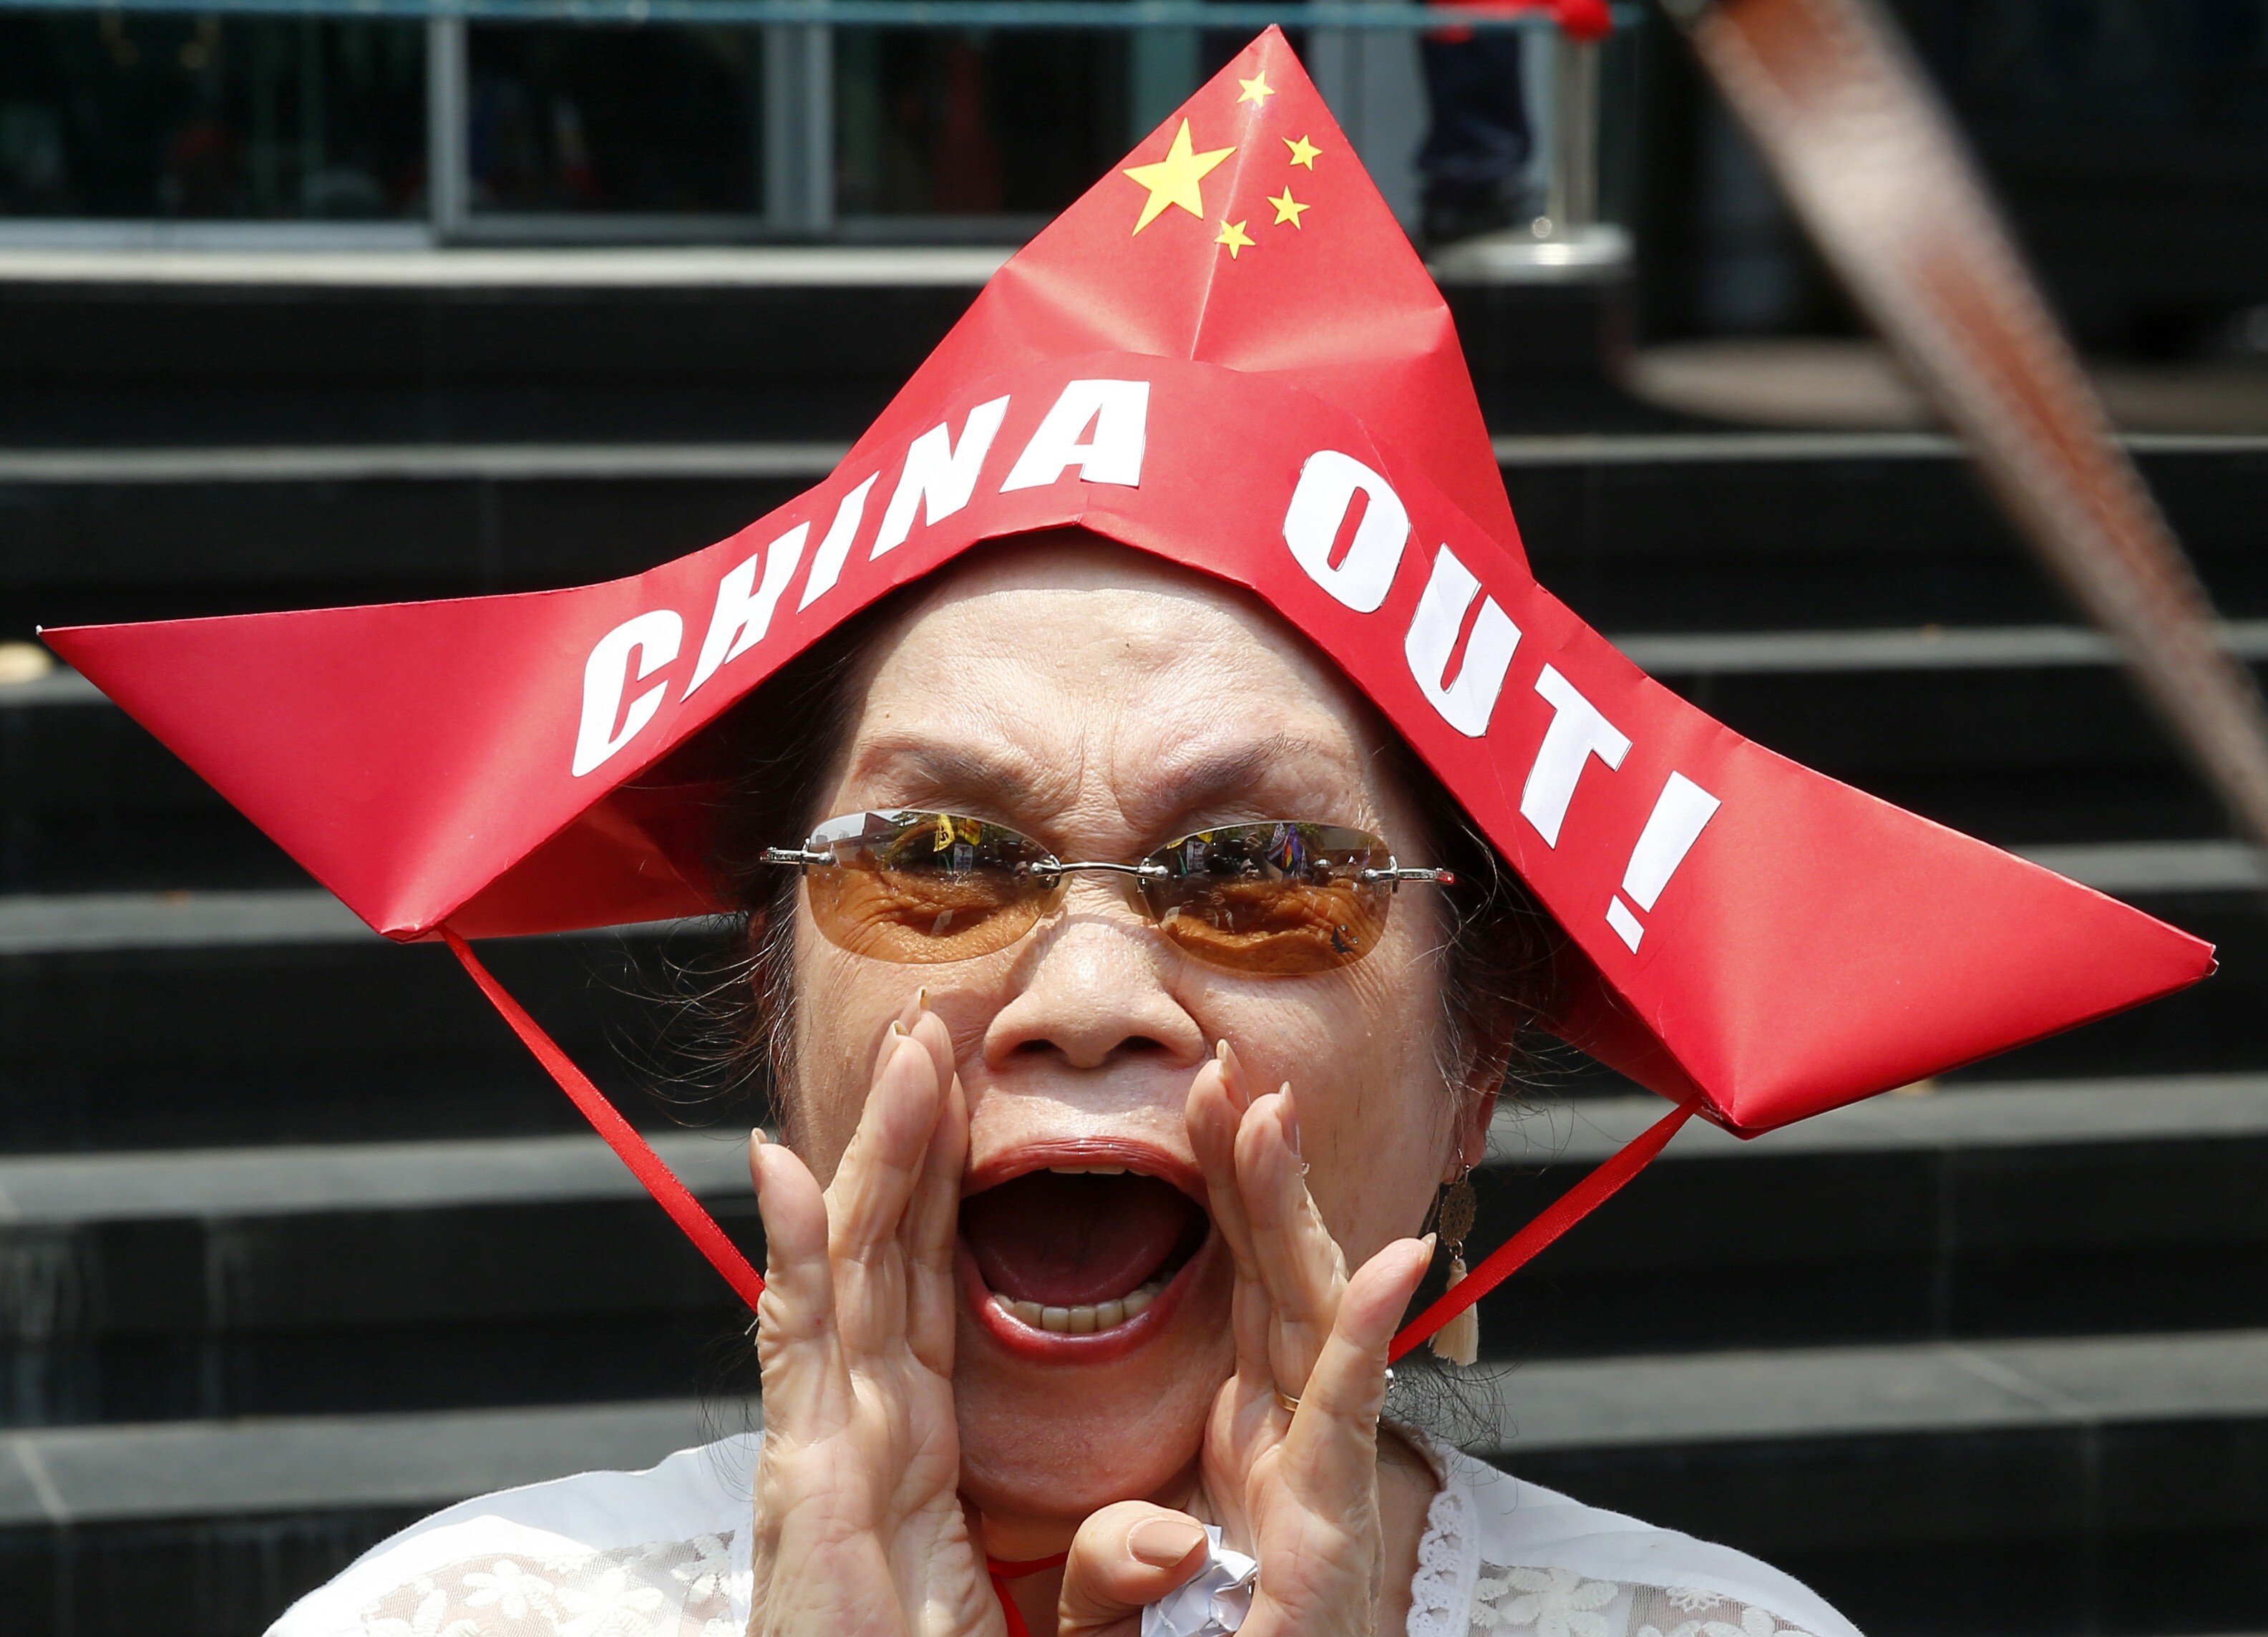 A protester wearing a boat-shaped hat shouts slogans against China’s incursions in the South China Sea. While Philippine diplomats work to strengthen relations with Beijing, there is strong anti-China sentiment among Filipinos. Photo: AP